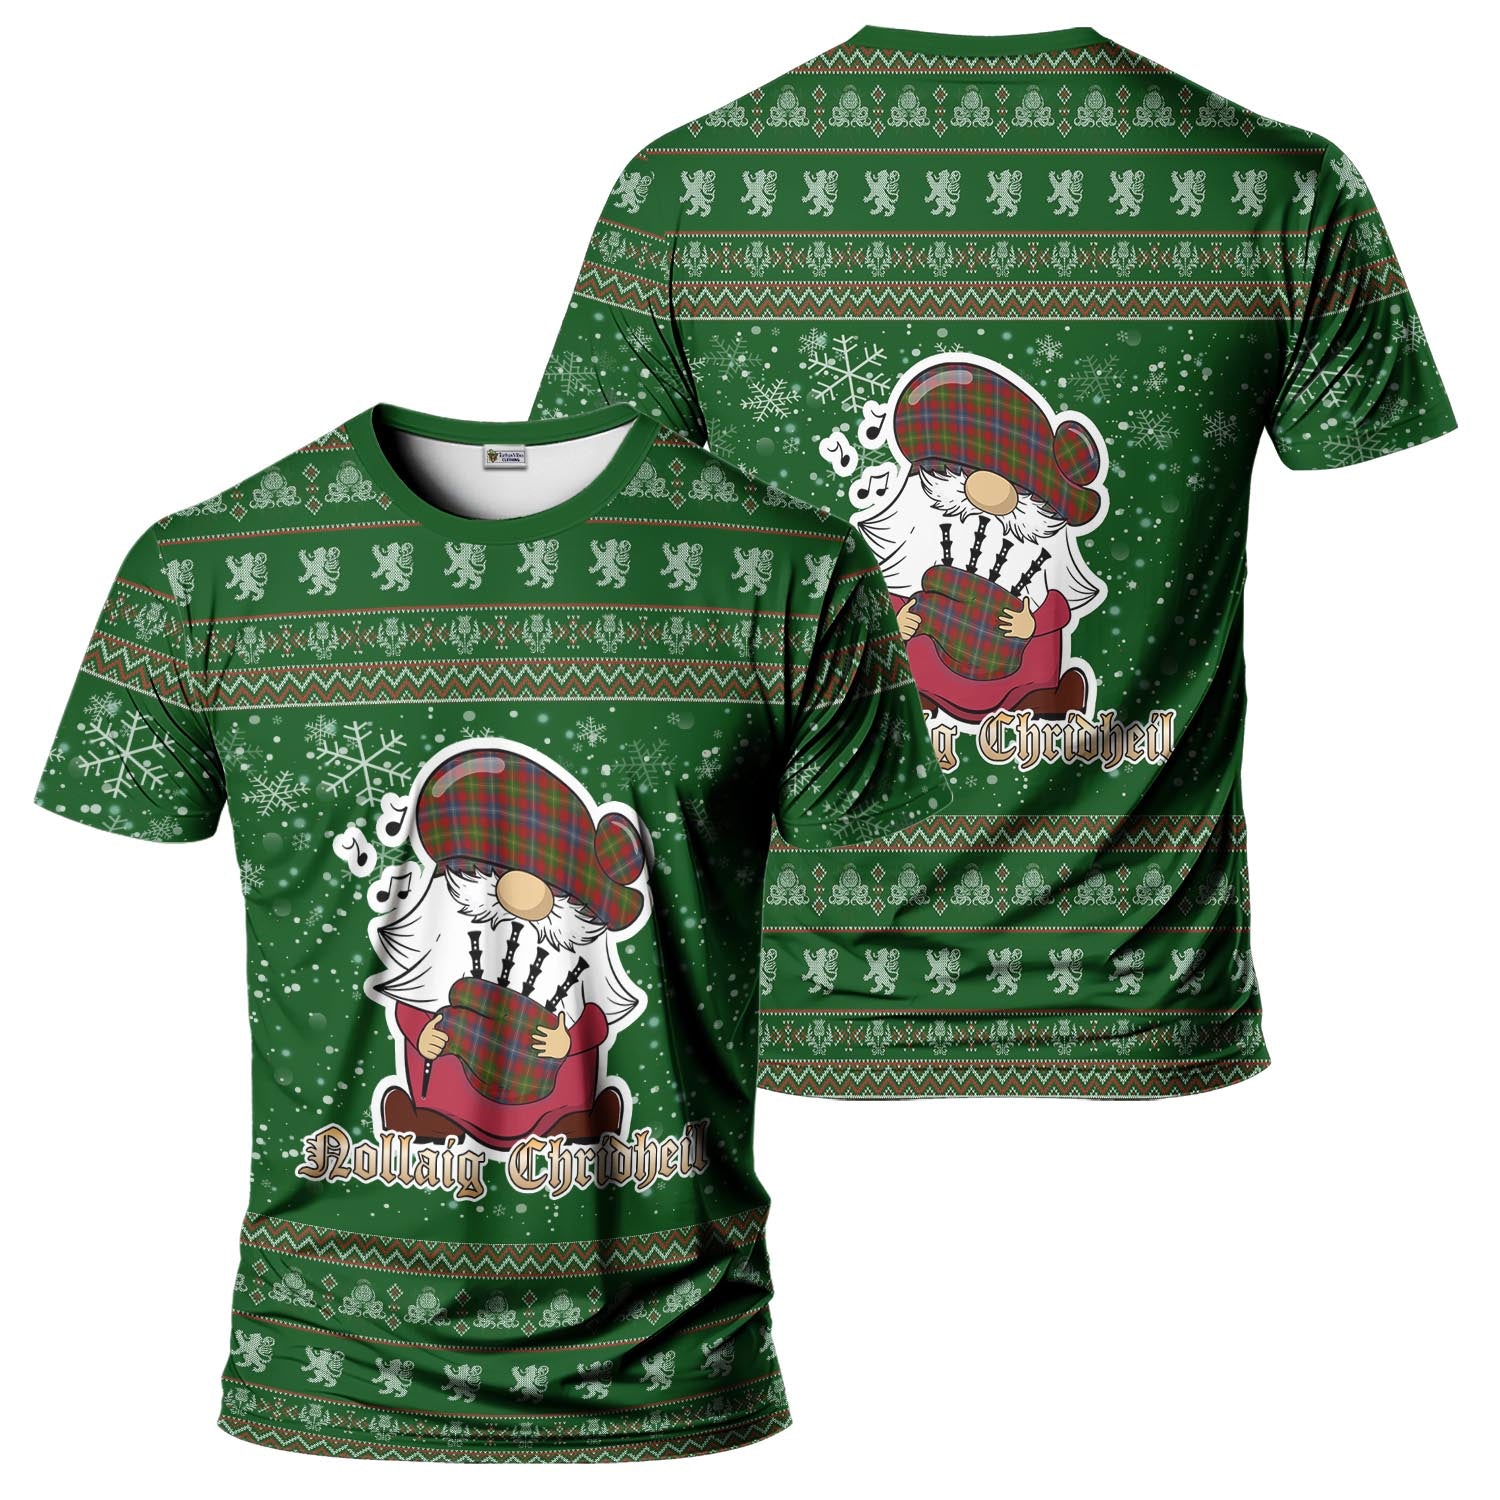 Forrester or Foster Clan Christmas Family T-Shirt with Funny Gnome Playing Bagpipes Men's Shirt Green - Tartanvibesclothing